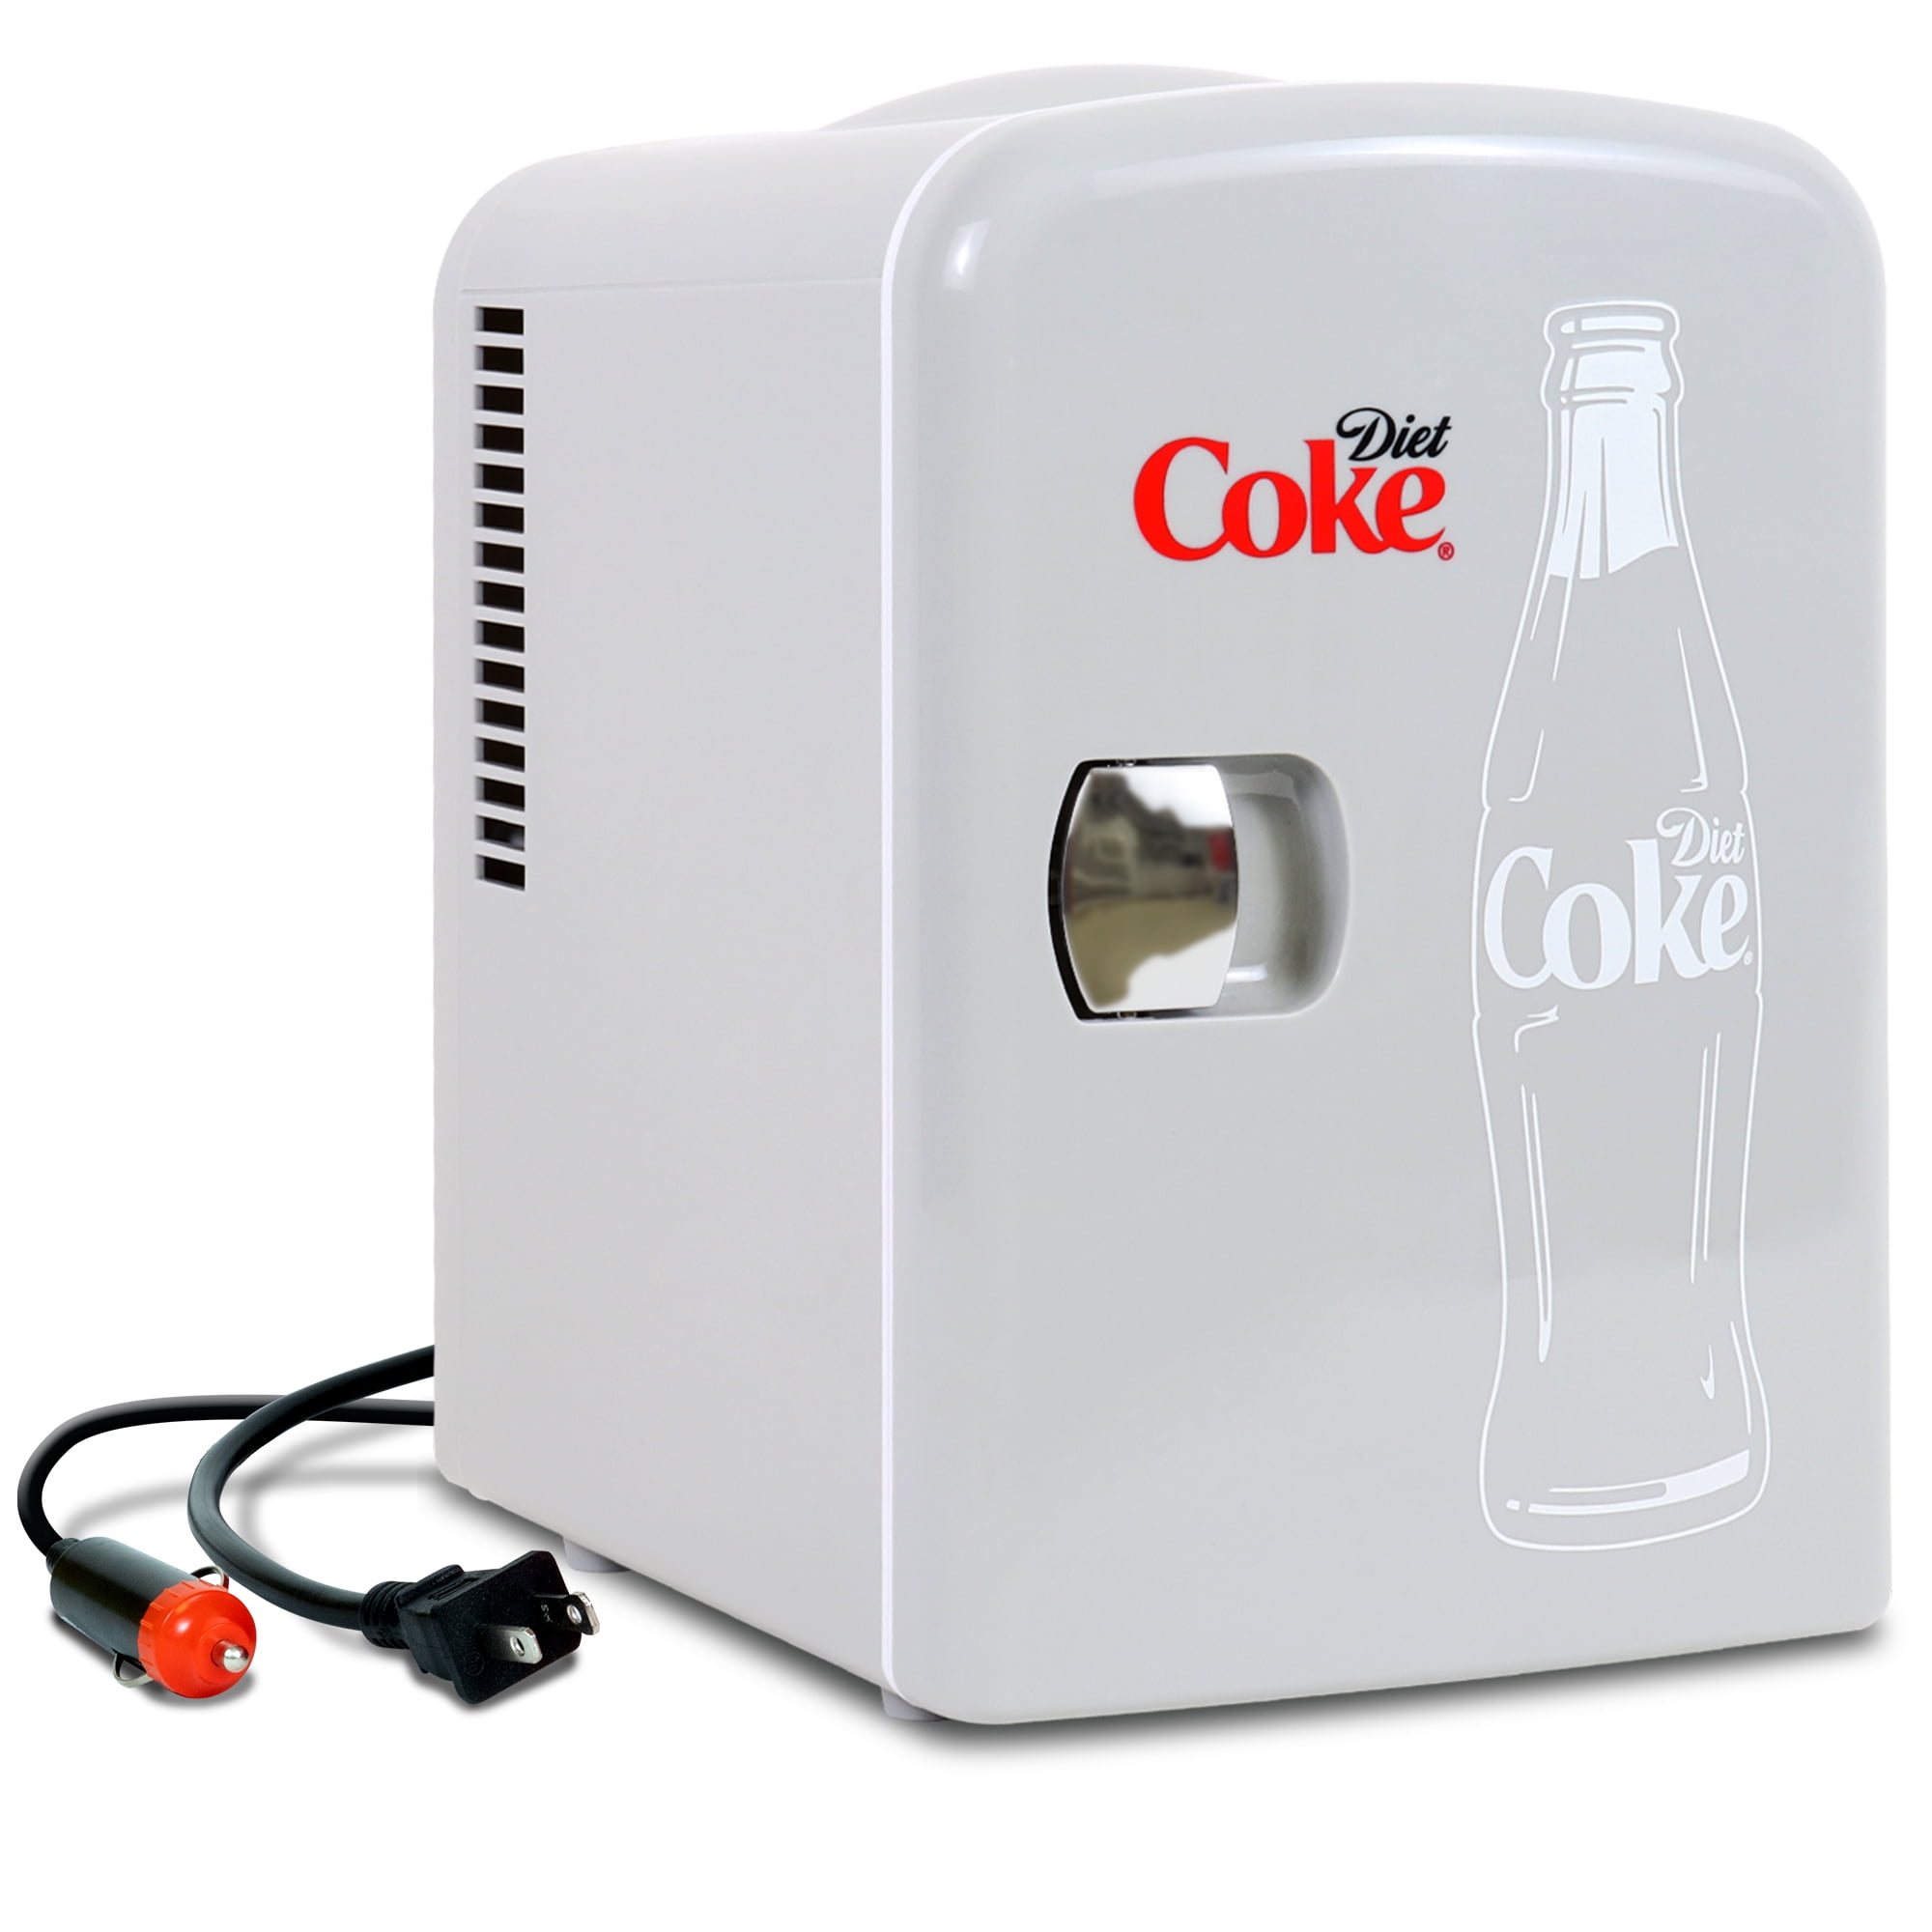 Coca-Cola 4L Portable Cooler/Warmer, Compact Personal-Travel-Fridge for  Snacks Lunch Drinks Cosmetics, Includes 12V and AC Cords, Cute Desk  Accessory